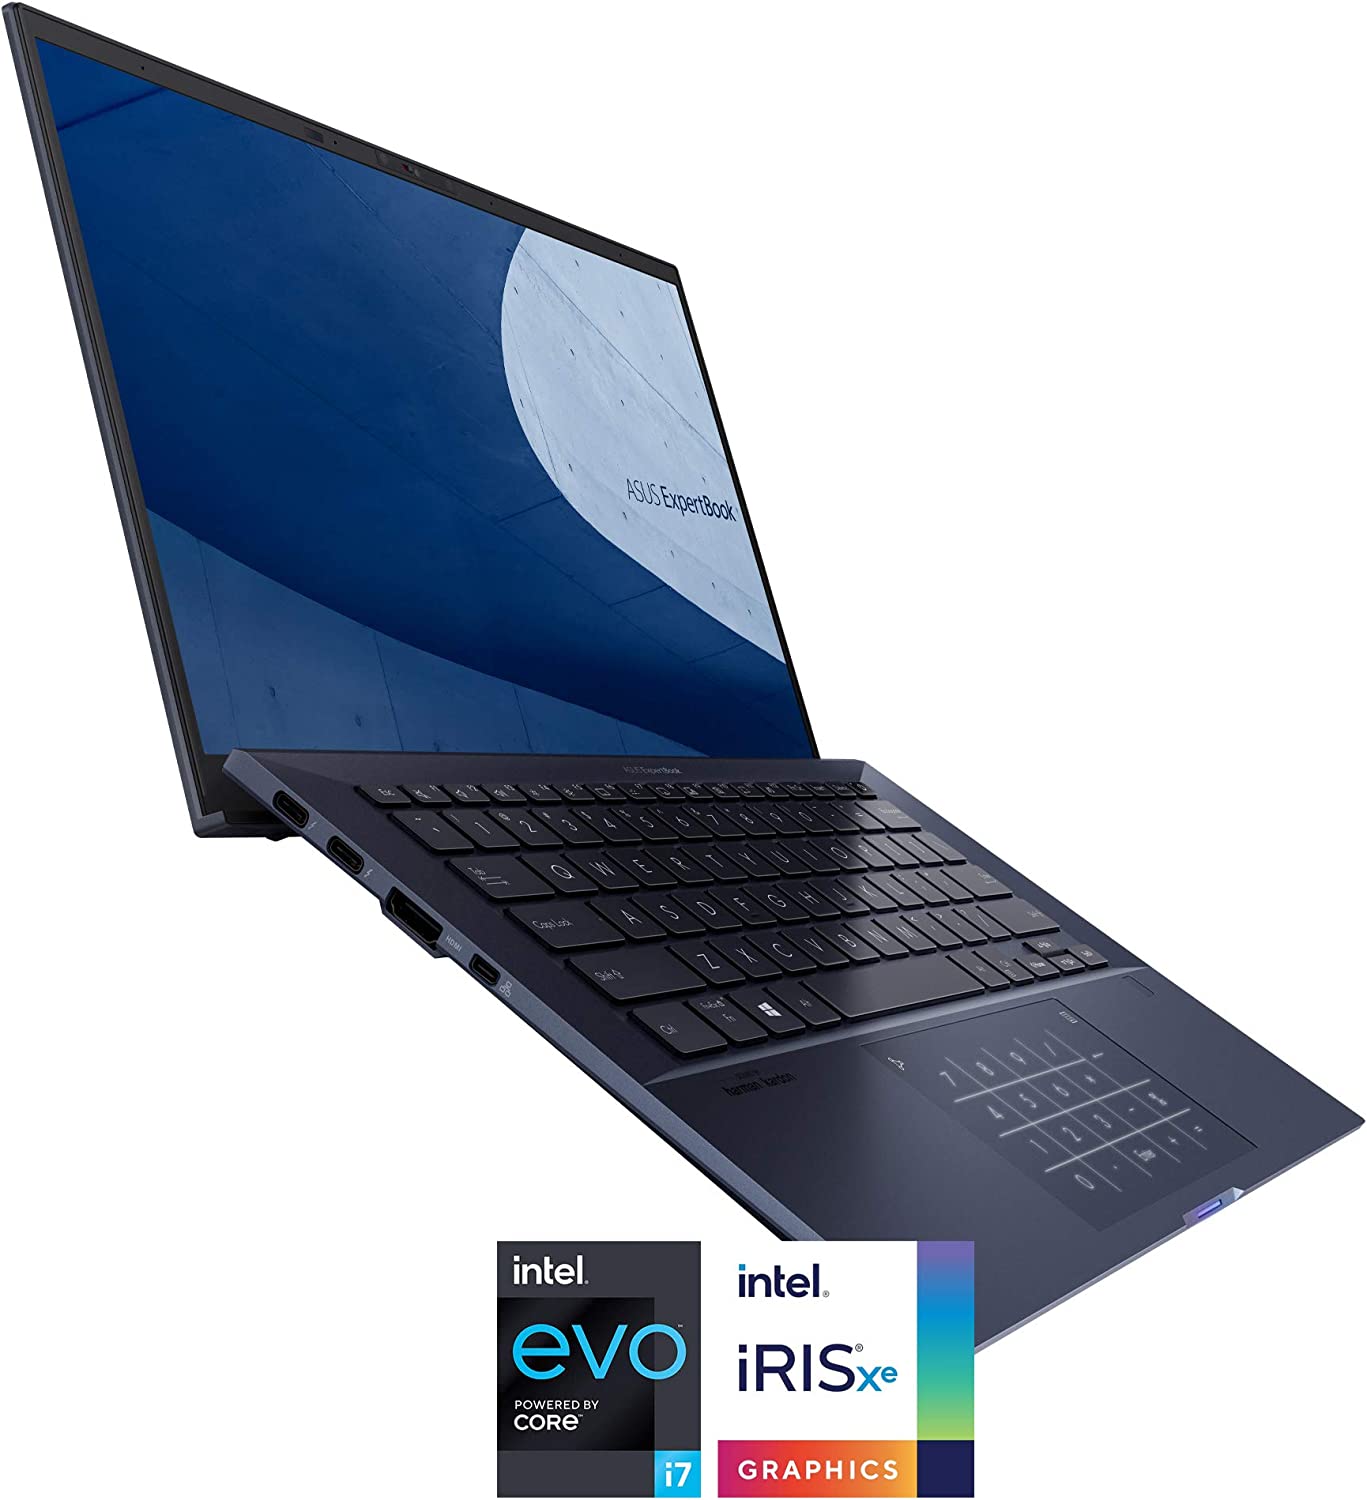 ASUS ExpertBook B9 Thin & Light Business Laptop, 14” FHD Display, Intel Core i7-1165G7 CPU, 1TB SSD, 16GB LPDDRX-RAM, Windows 10 Pro, Up to 17 Hrs-Battery Life-Sleeve, B9450CEA-XH75